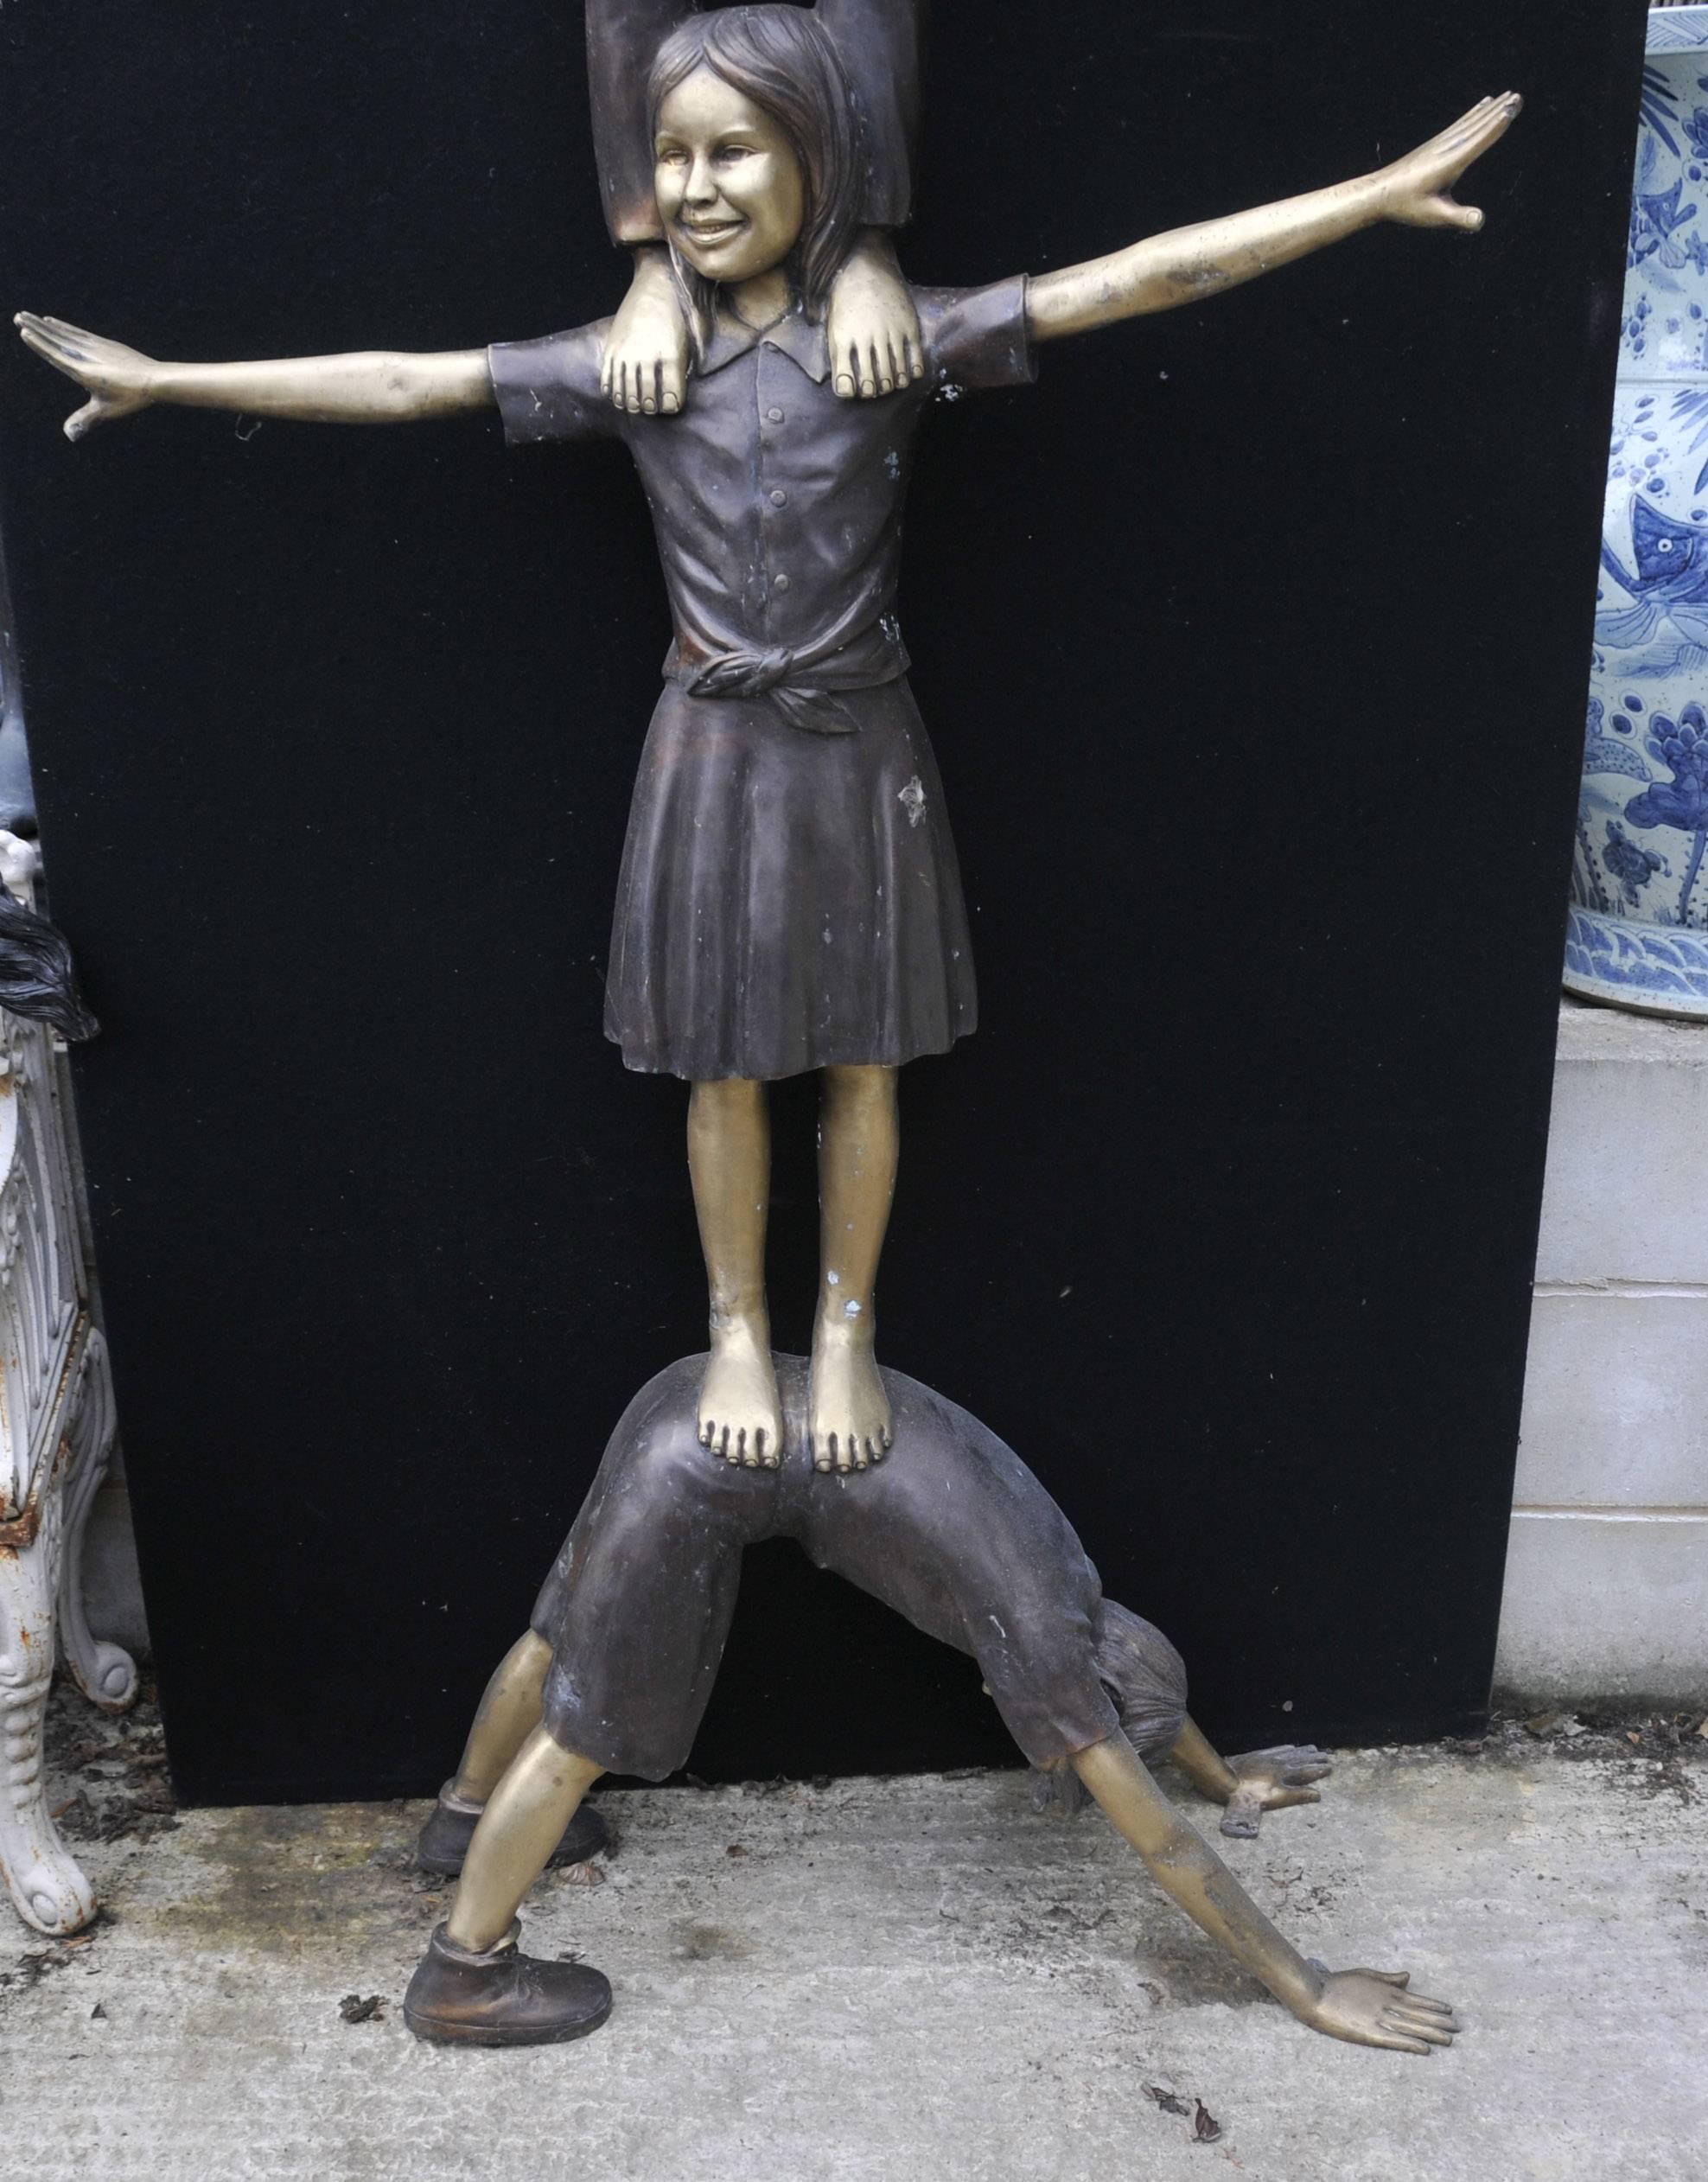 Amazing lifesize bronze statue of three kids doing acrobatics.
Of course being bronze this can live outside with no fear of rusting so great piece for the garden or lawn.
Stands in at over seven feet tall so great size to this piece - 220